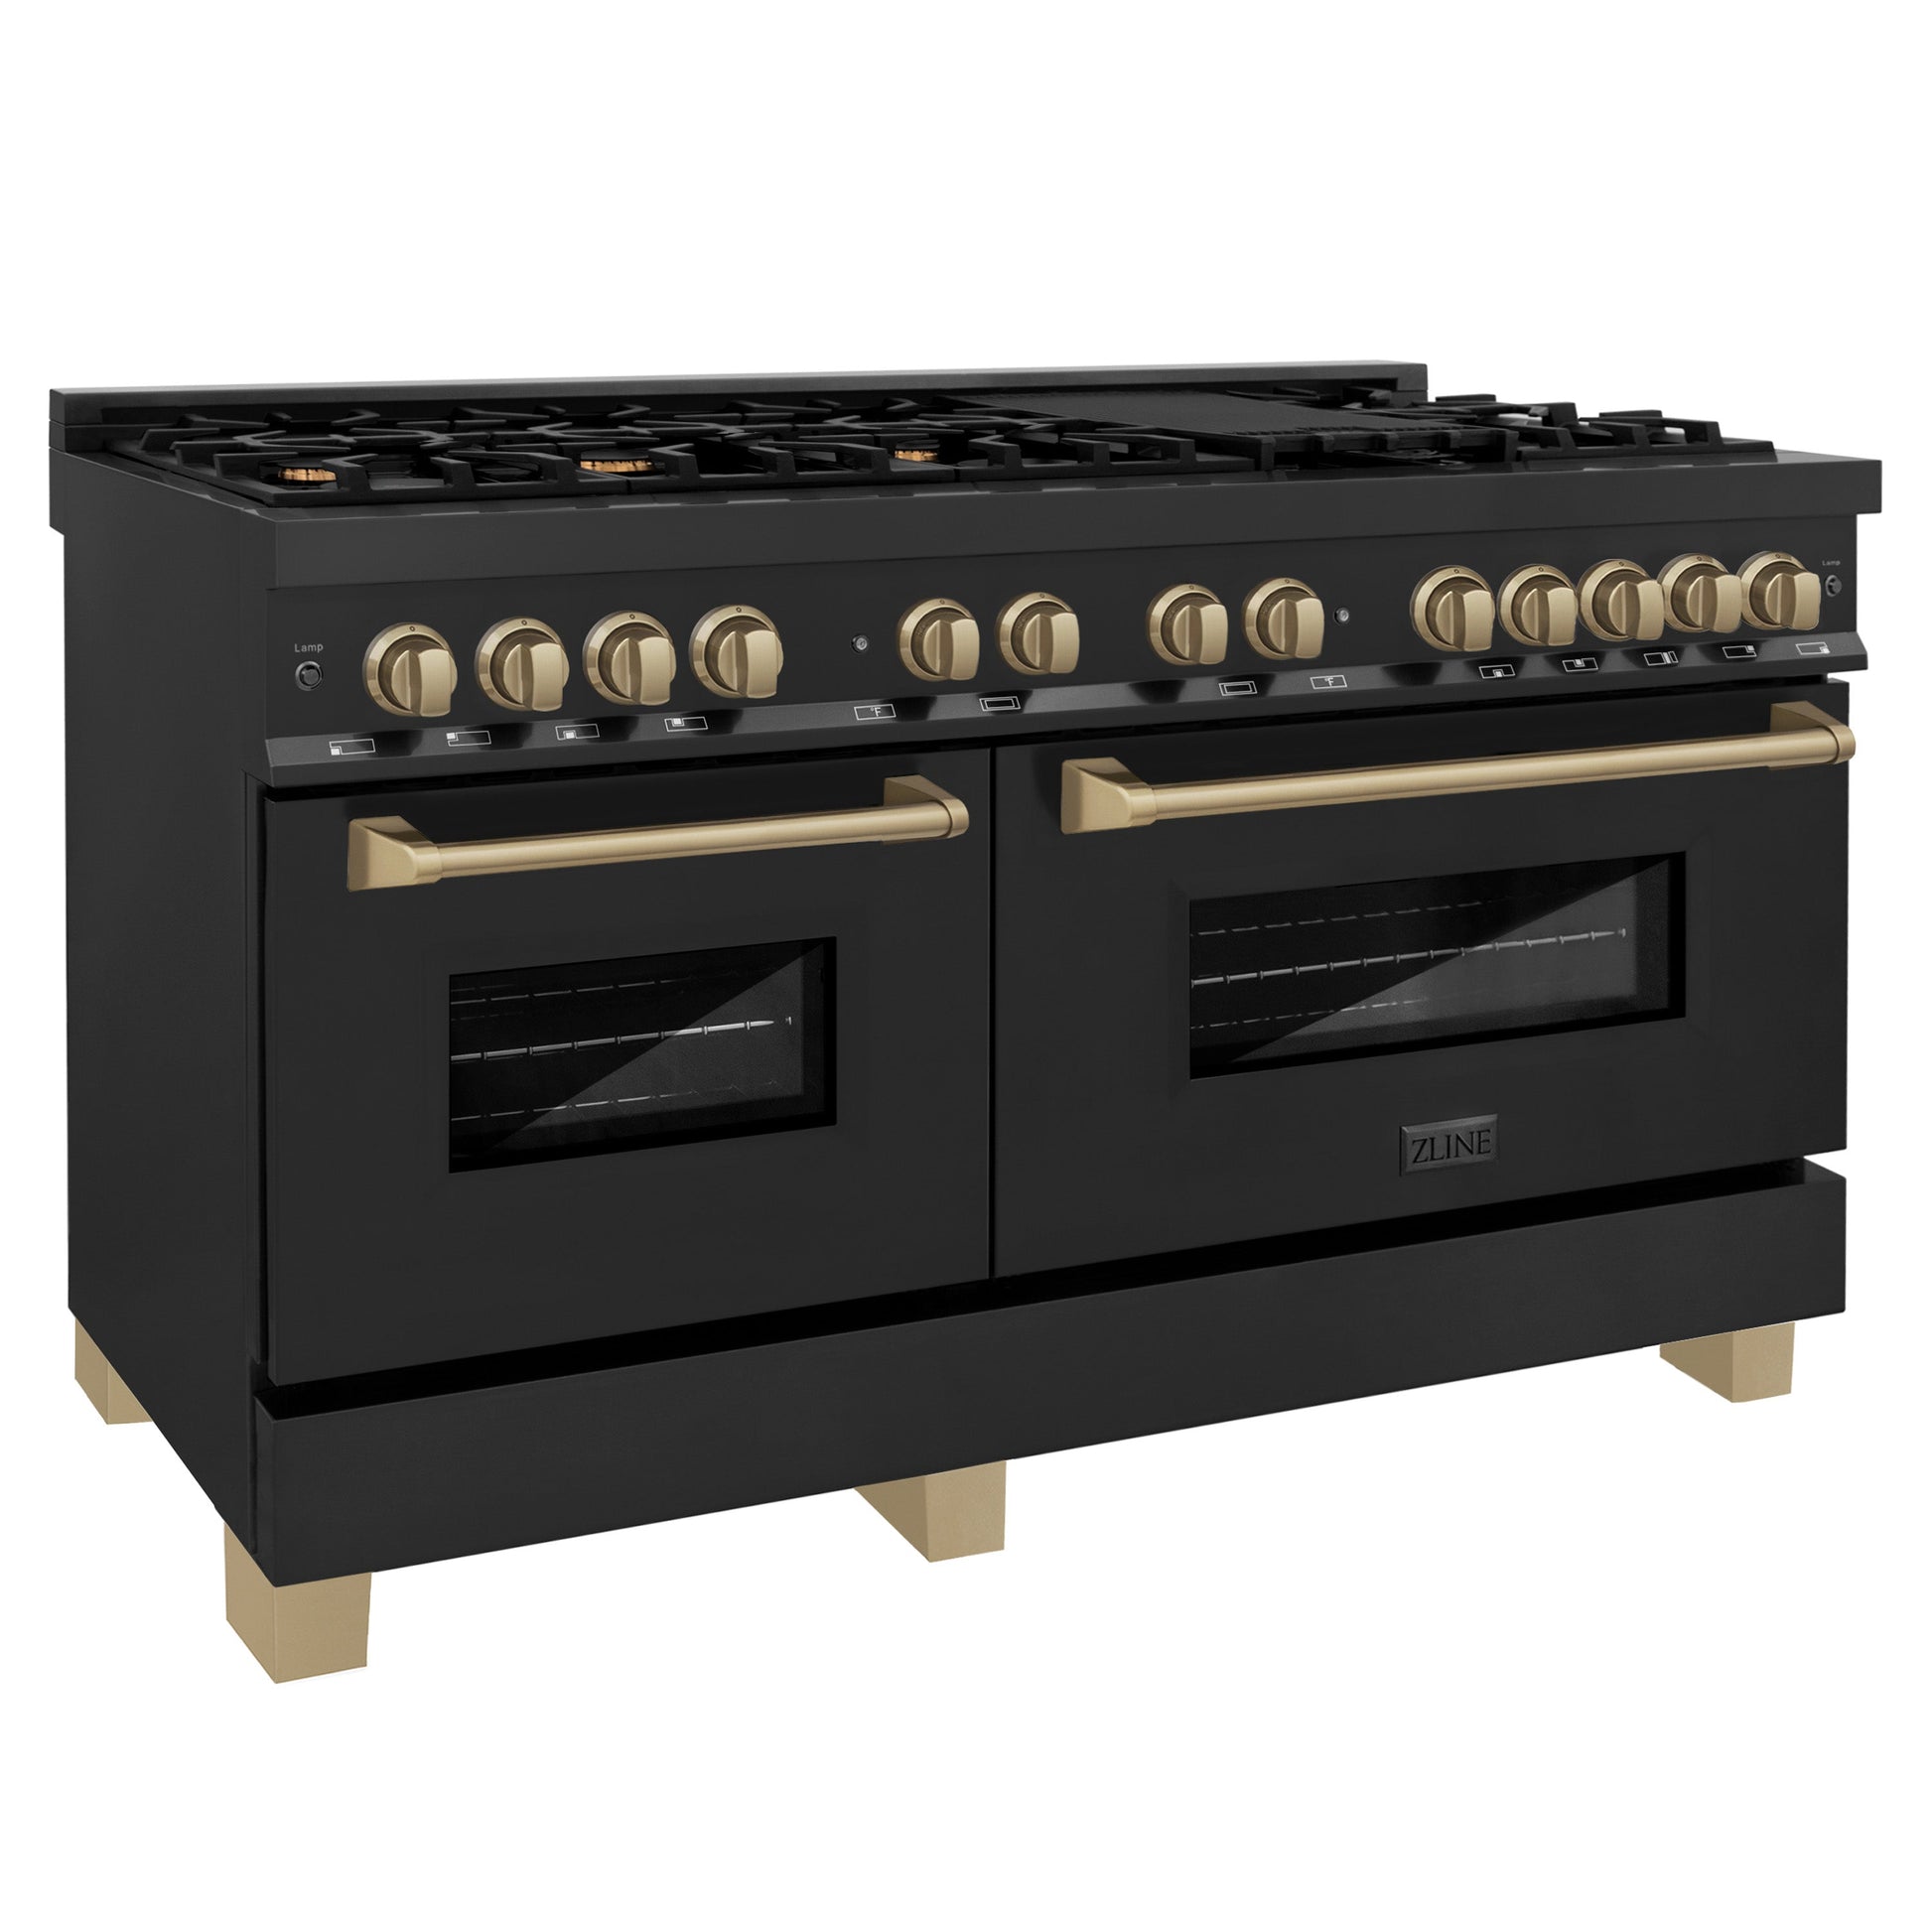 ZLINE Autograph Edition 60" Dual Fuel Range with Gas Stove and Electric Oven - Black Stainless Steel with Accents